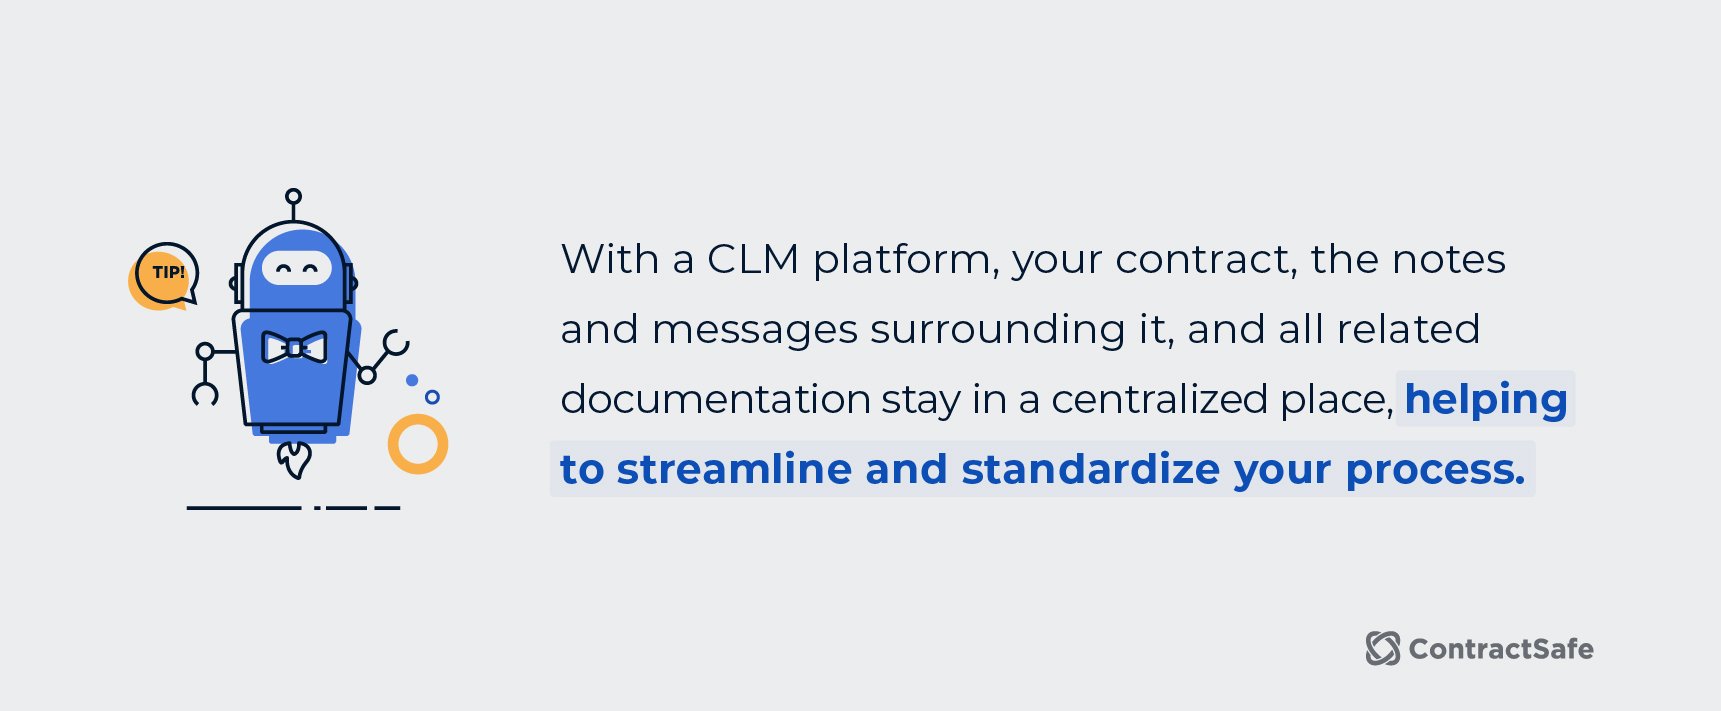 With a CLM platform, your contract, the notes and messages surrounding it, and all related documentation stay in a centralized place, helping to streamline and standardize your process. 